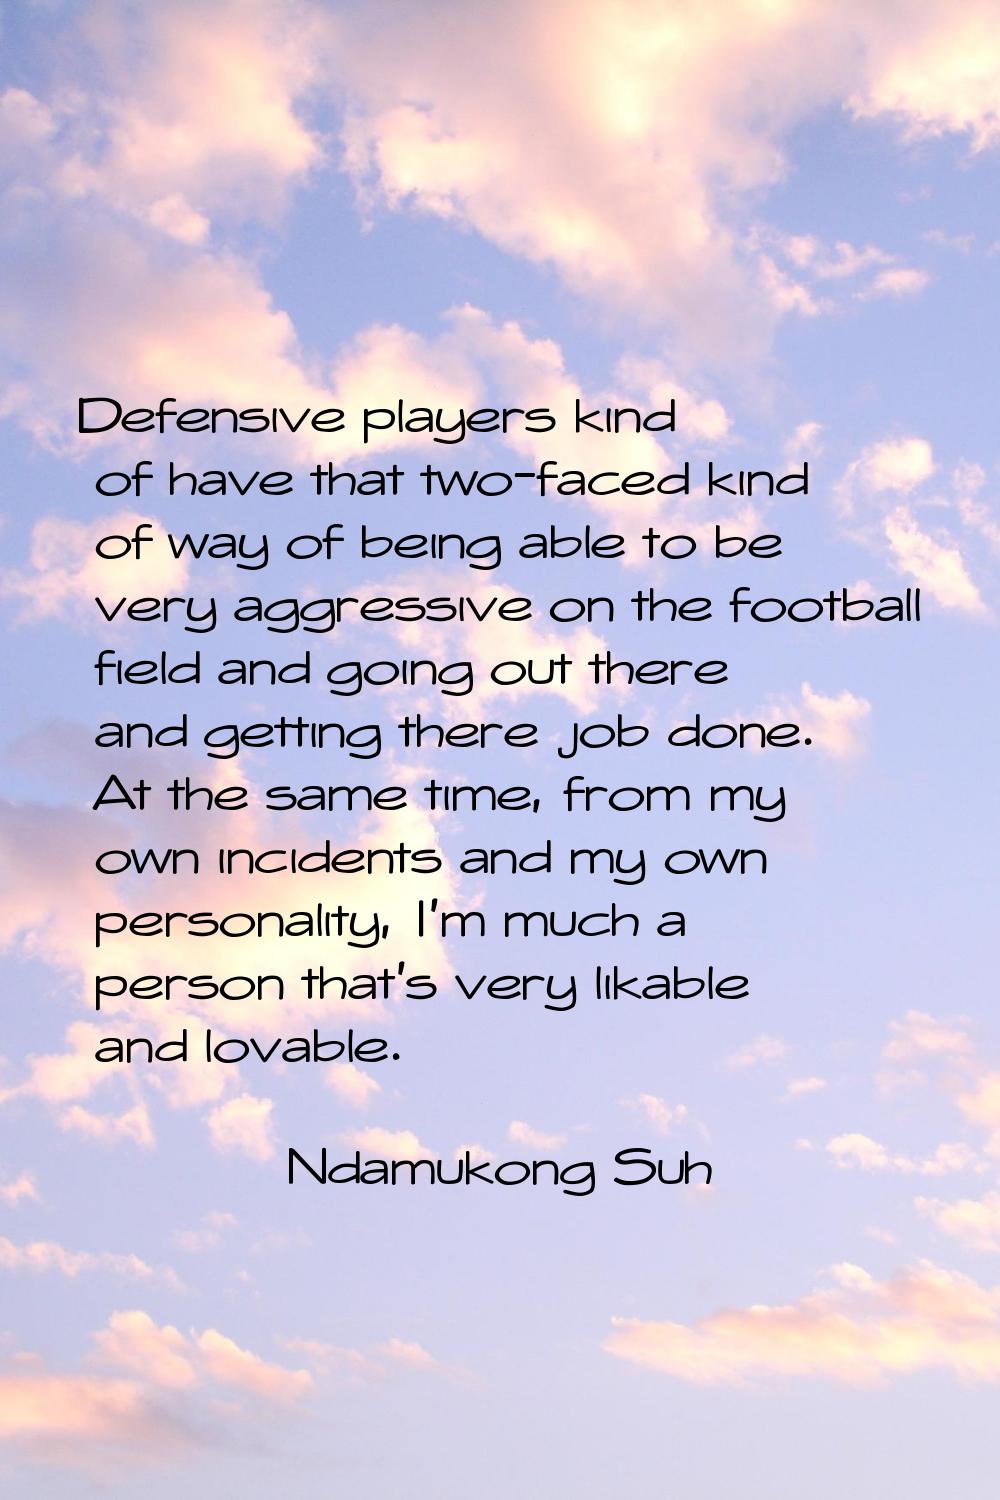 Defensive players kind of have that two-faced kind of way of being able to be very aggressive on th